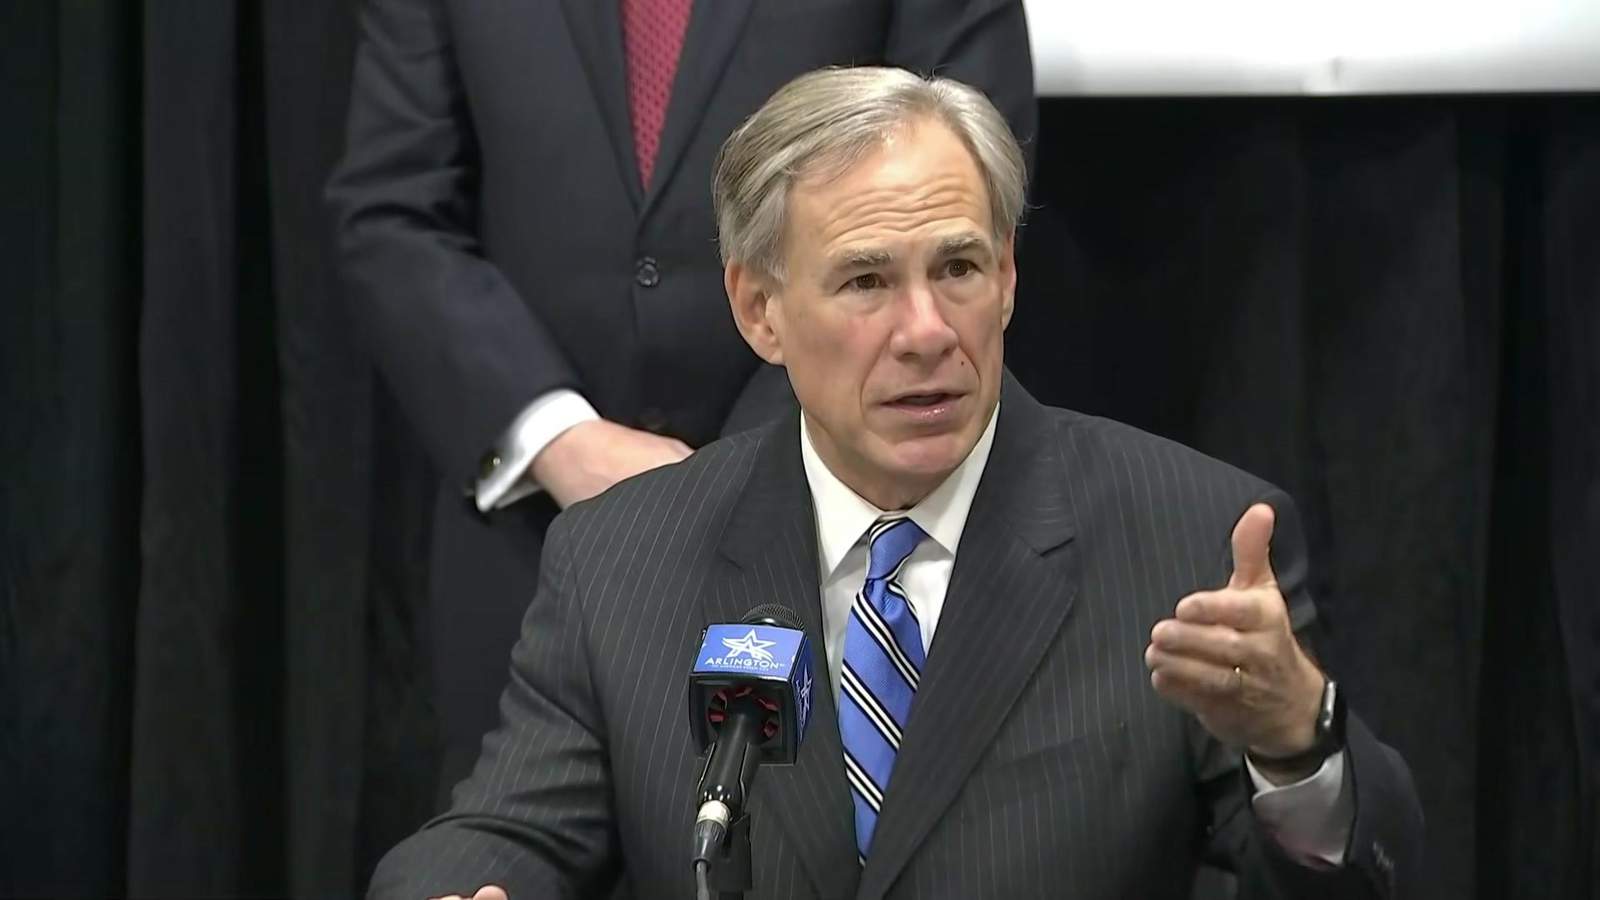 Abbott says state moving to vaccinate Texans as quickly as possible